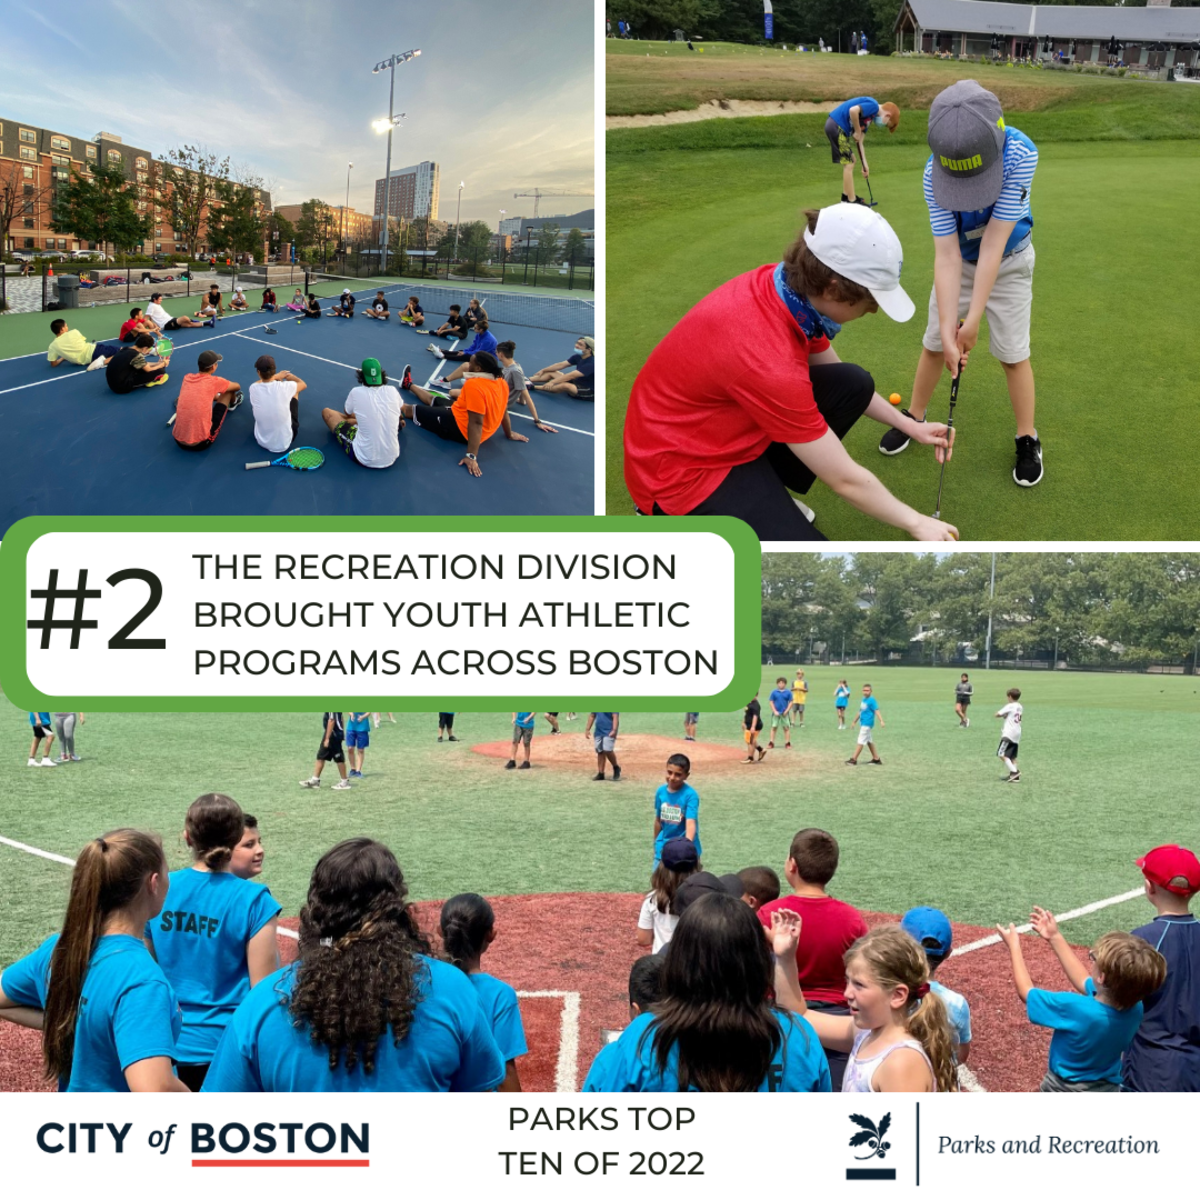 Parks top ten of 2022 #2 The recreation division brought youth athletic programs across Boston. Grid - Kid golfing, pickleballers gathered on a court, and kids playing baseball